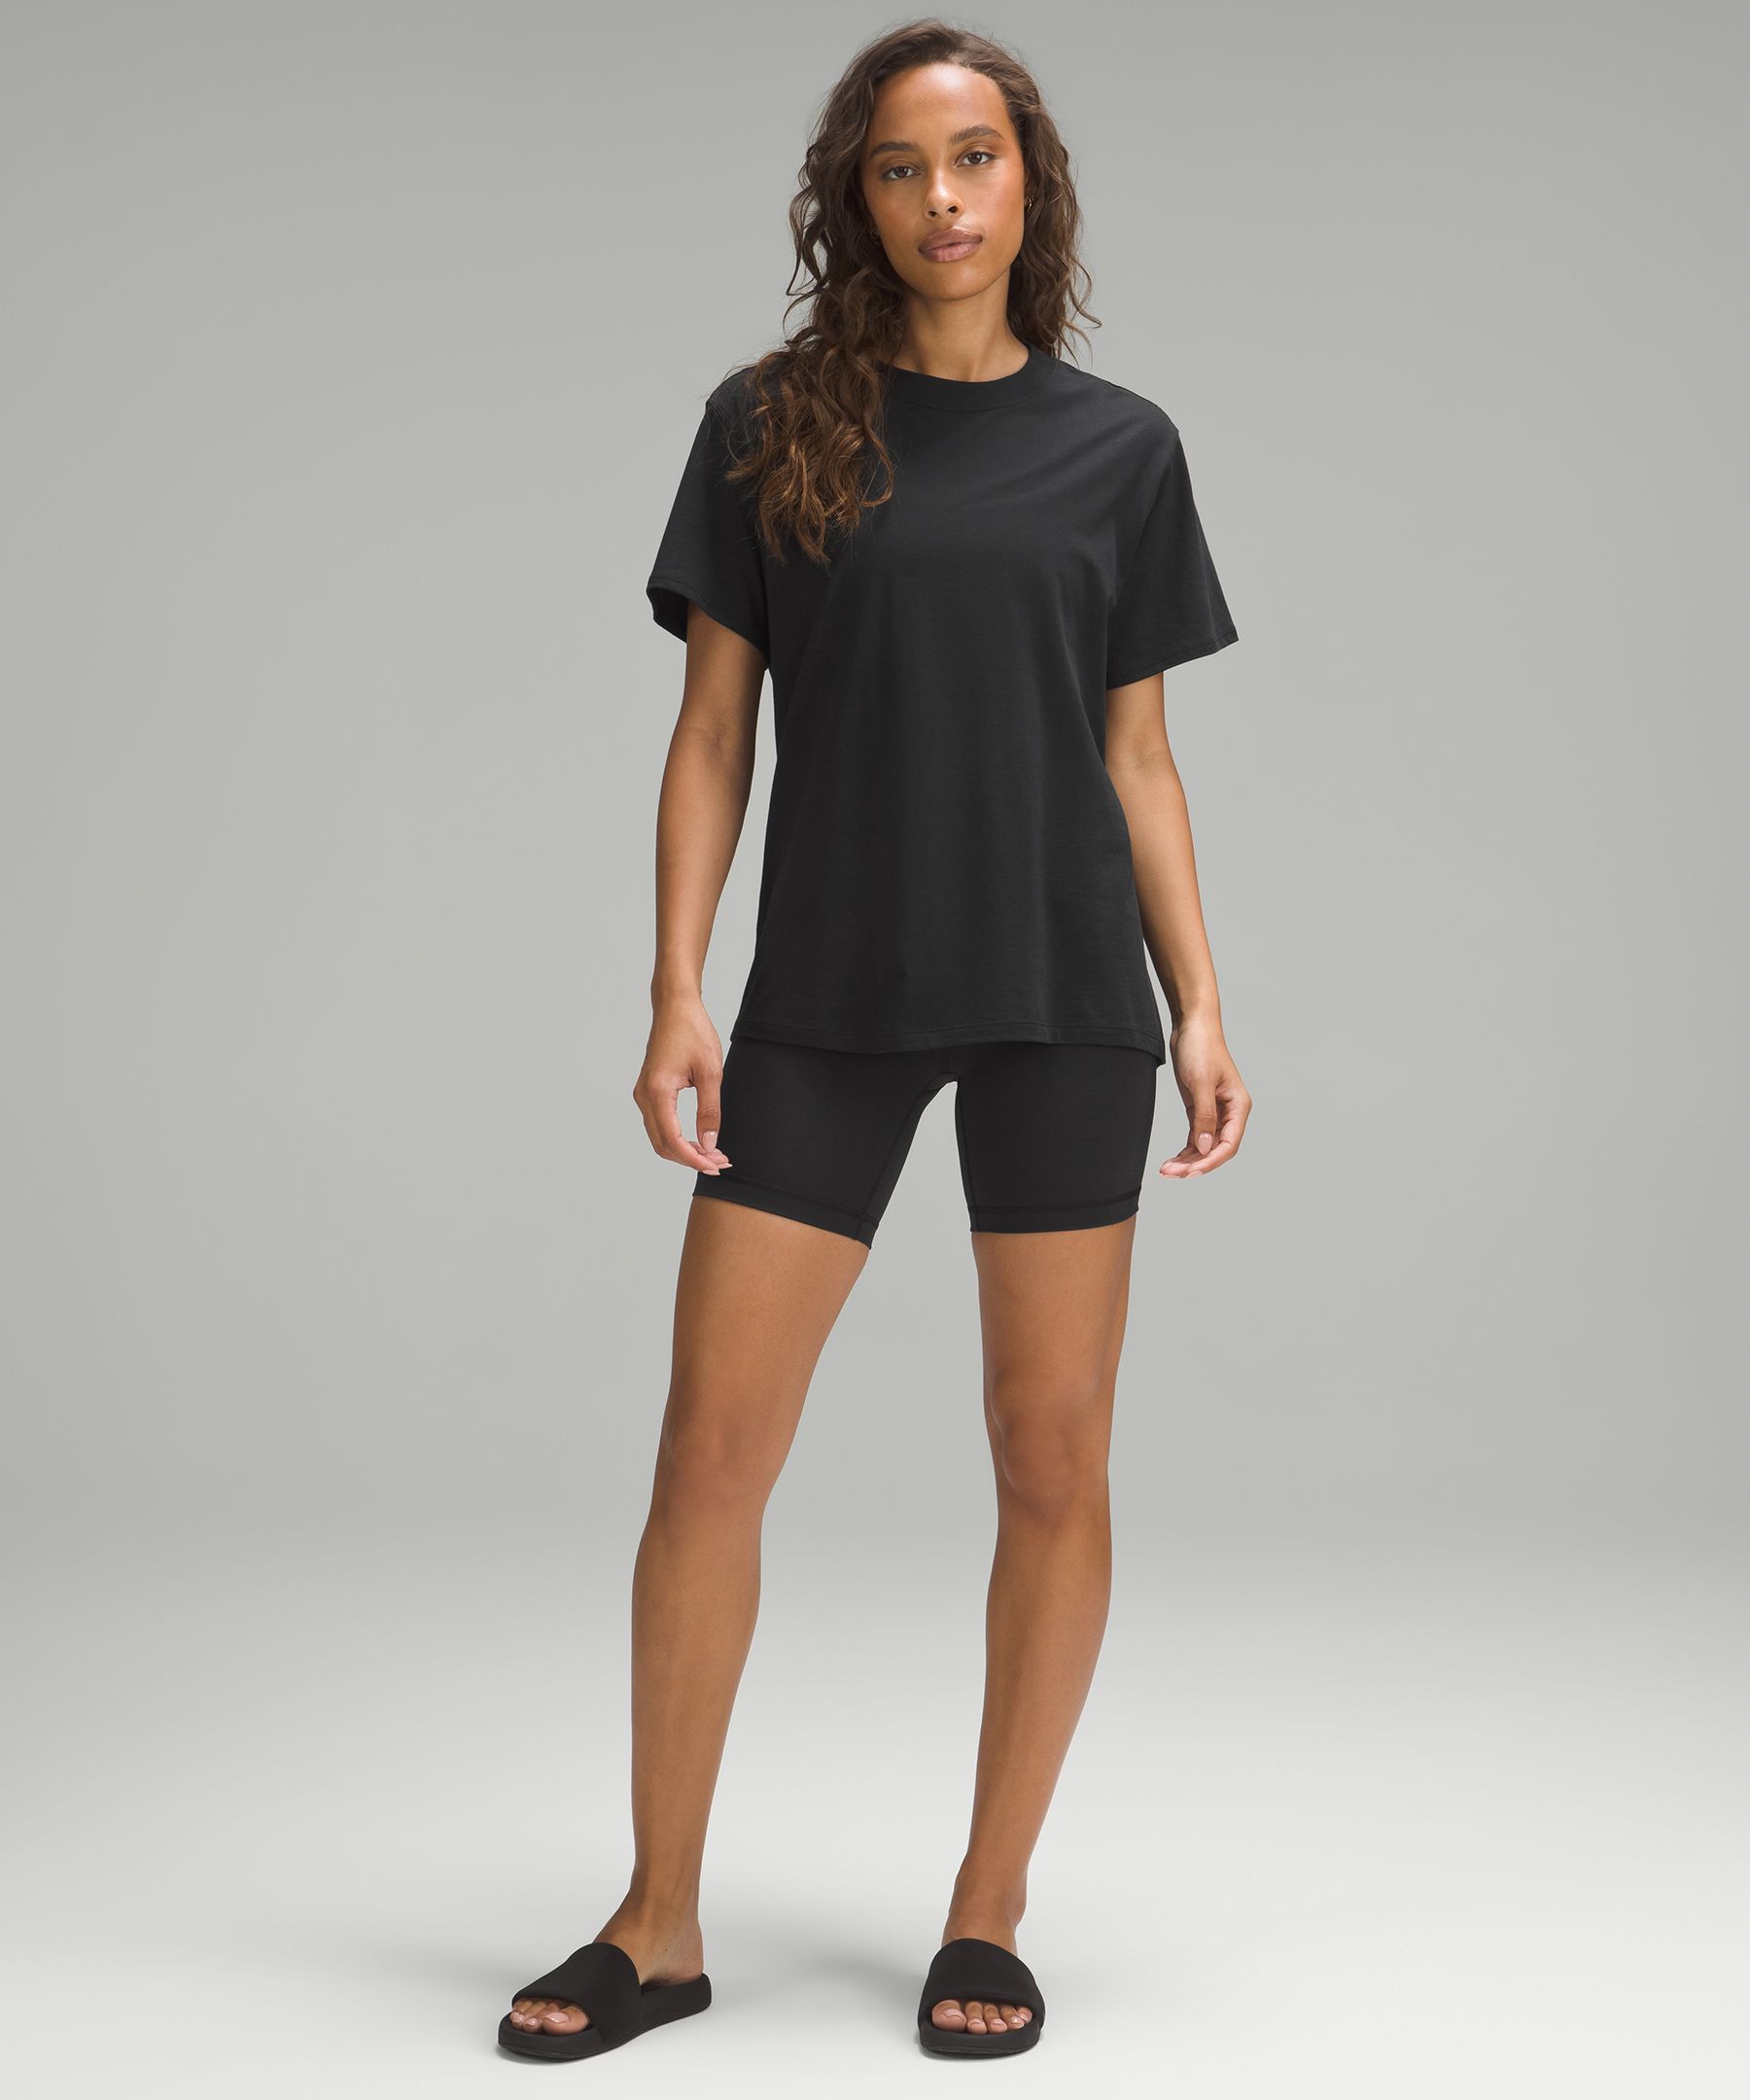 Lululemon All Yours Cotton T-Shirt. 3